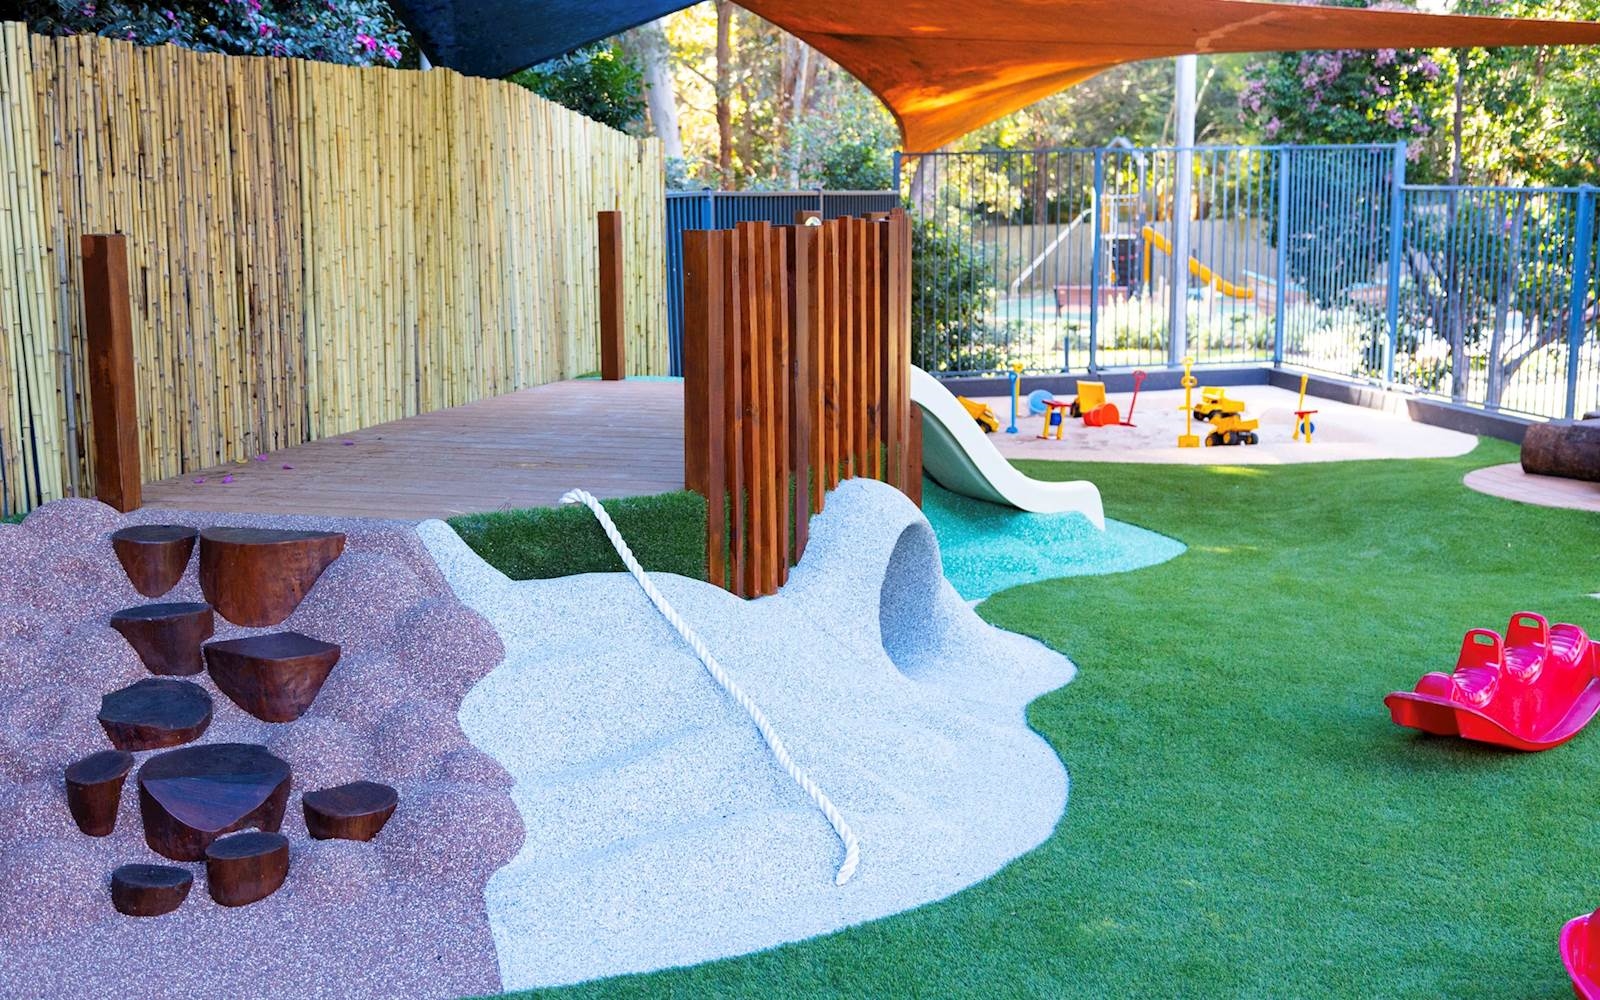 Heritage House Turramurra Childcare & Early Learning Centre